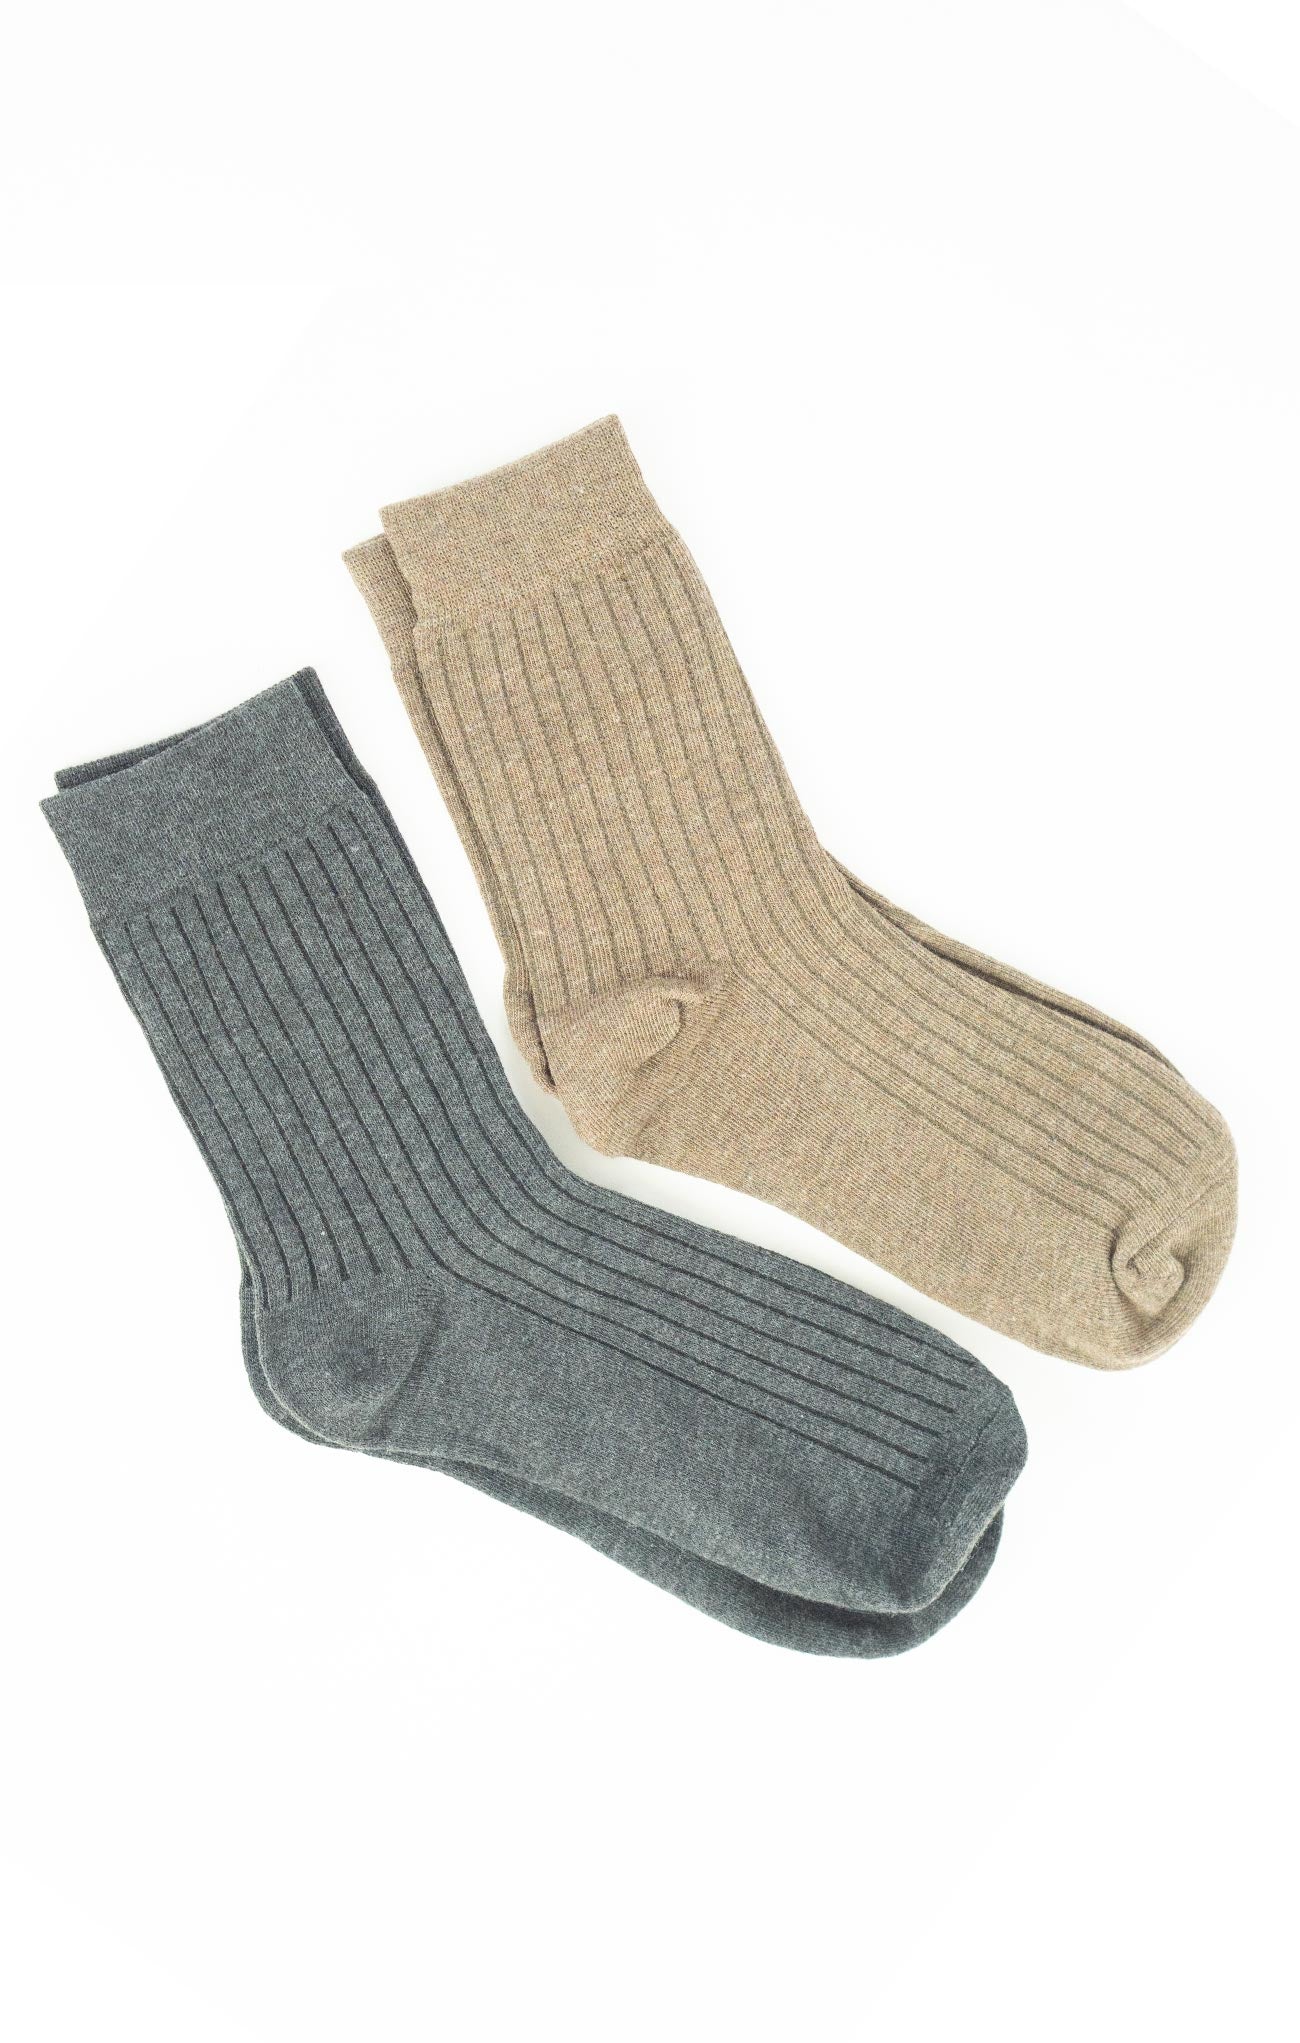 GRACE SIGNATURE SOCKS 2 PACK-ankle height,charcoal brown,heather grey oatmeal,solid pattern